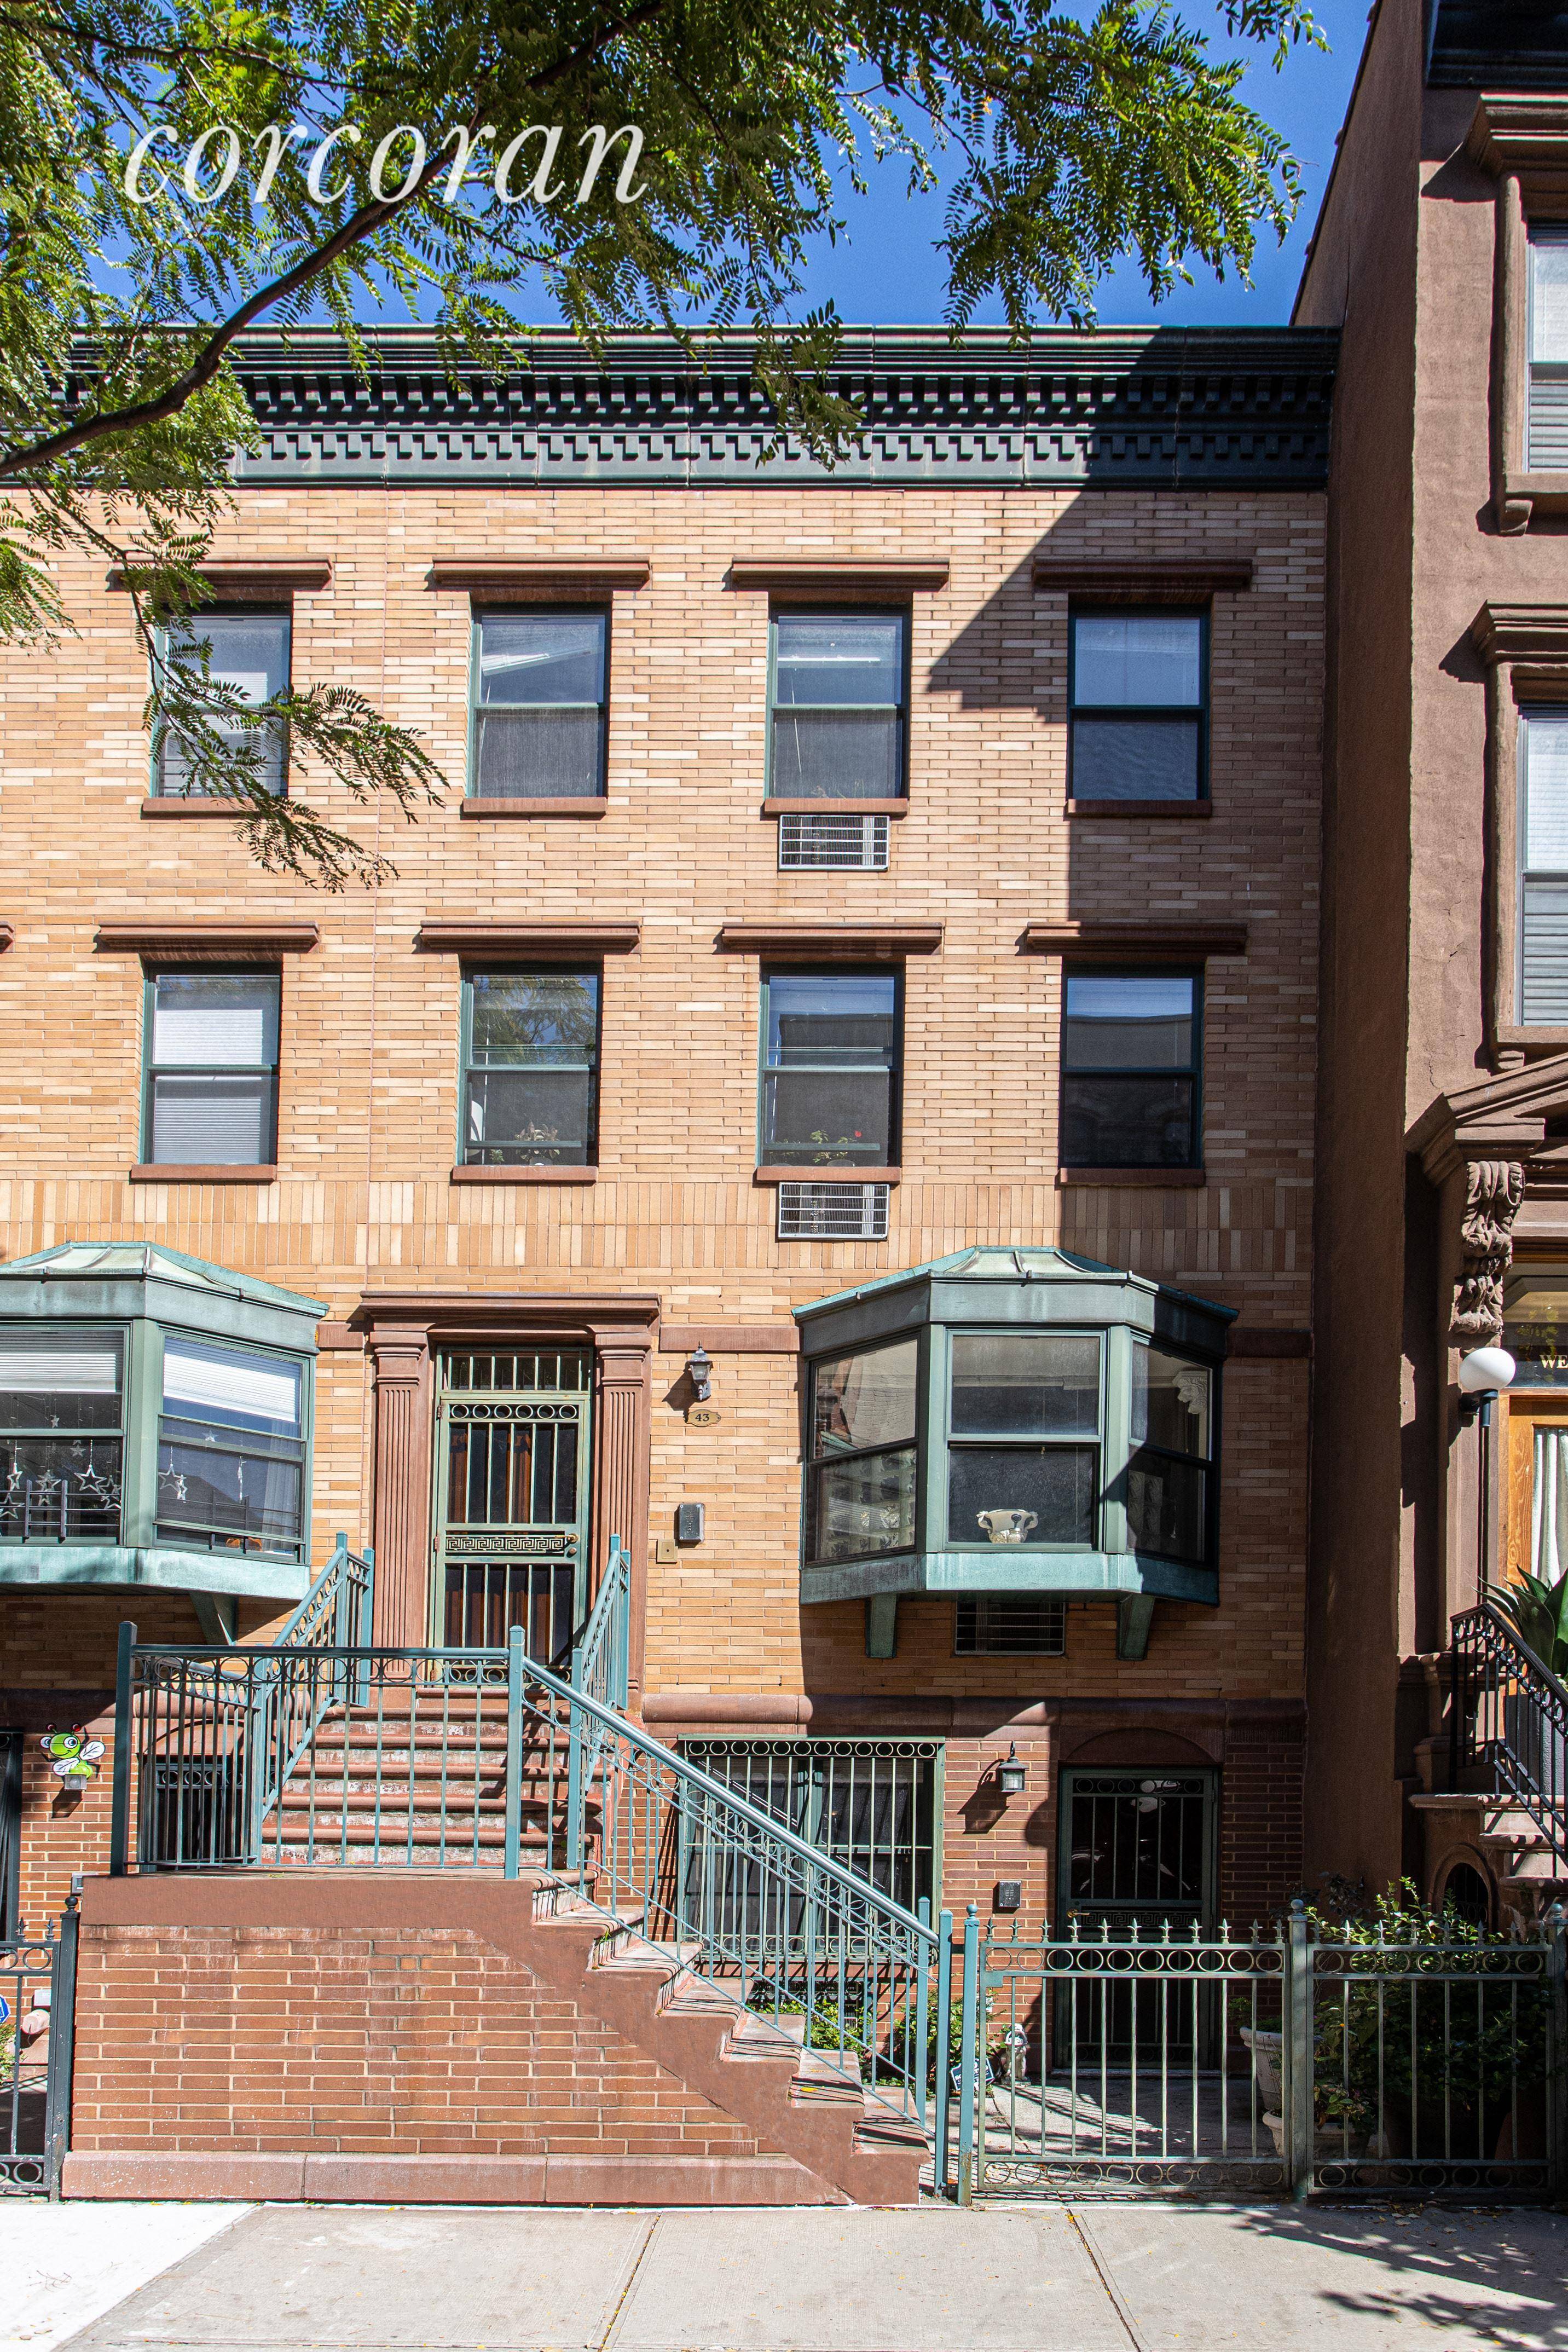 Live with income at 43 West 127th Street.